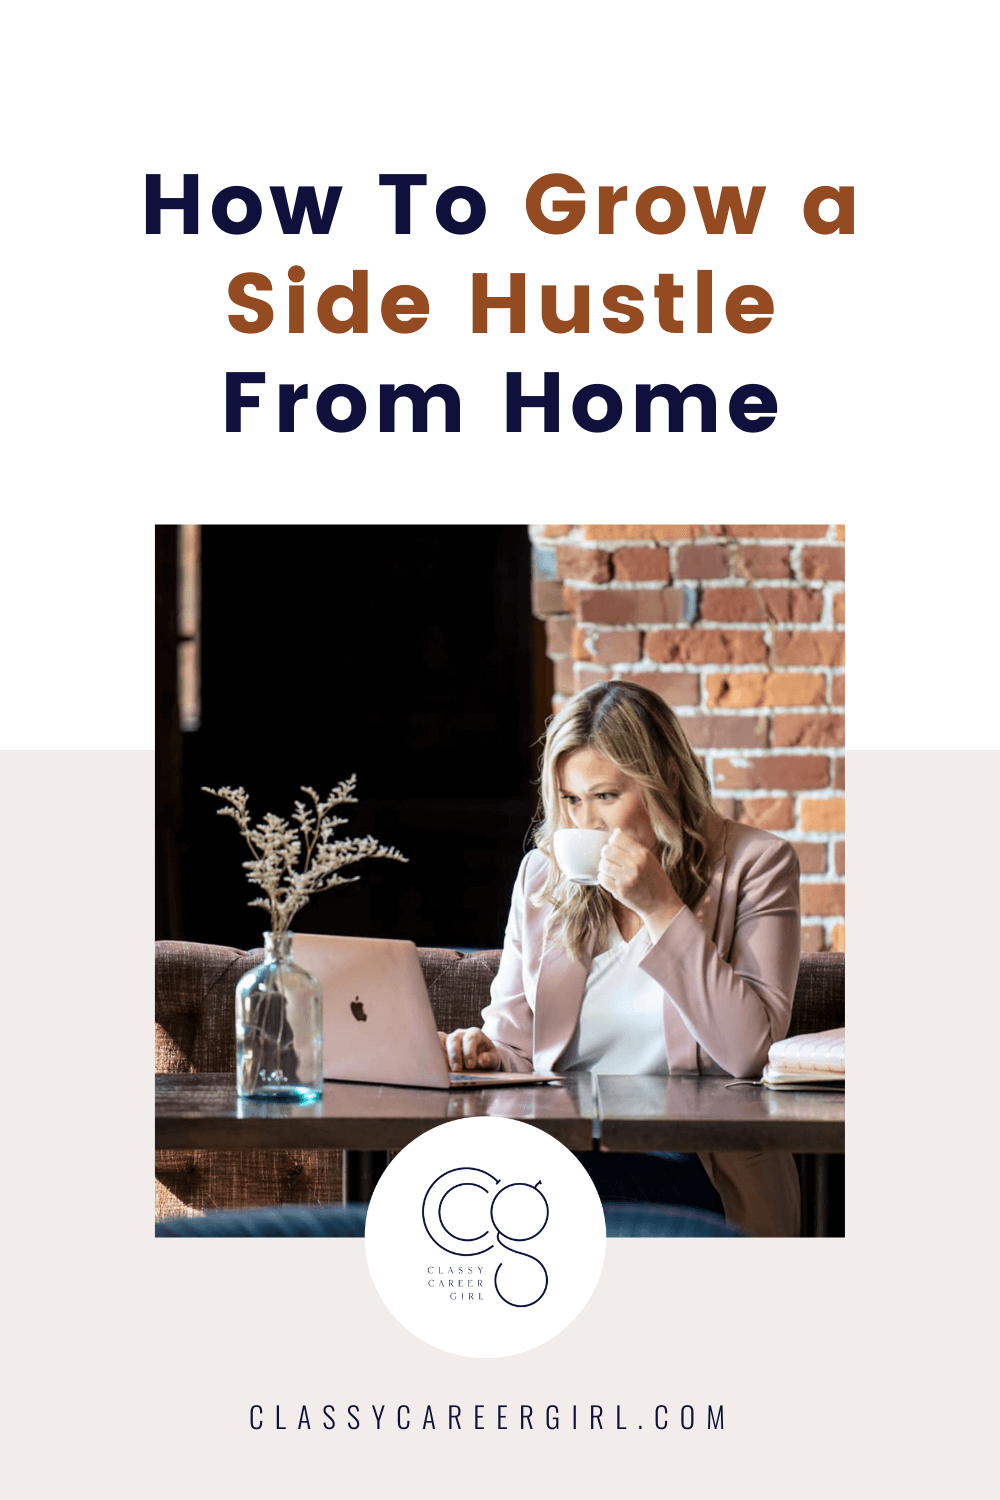 How To Grow a Side Hustle From Home